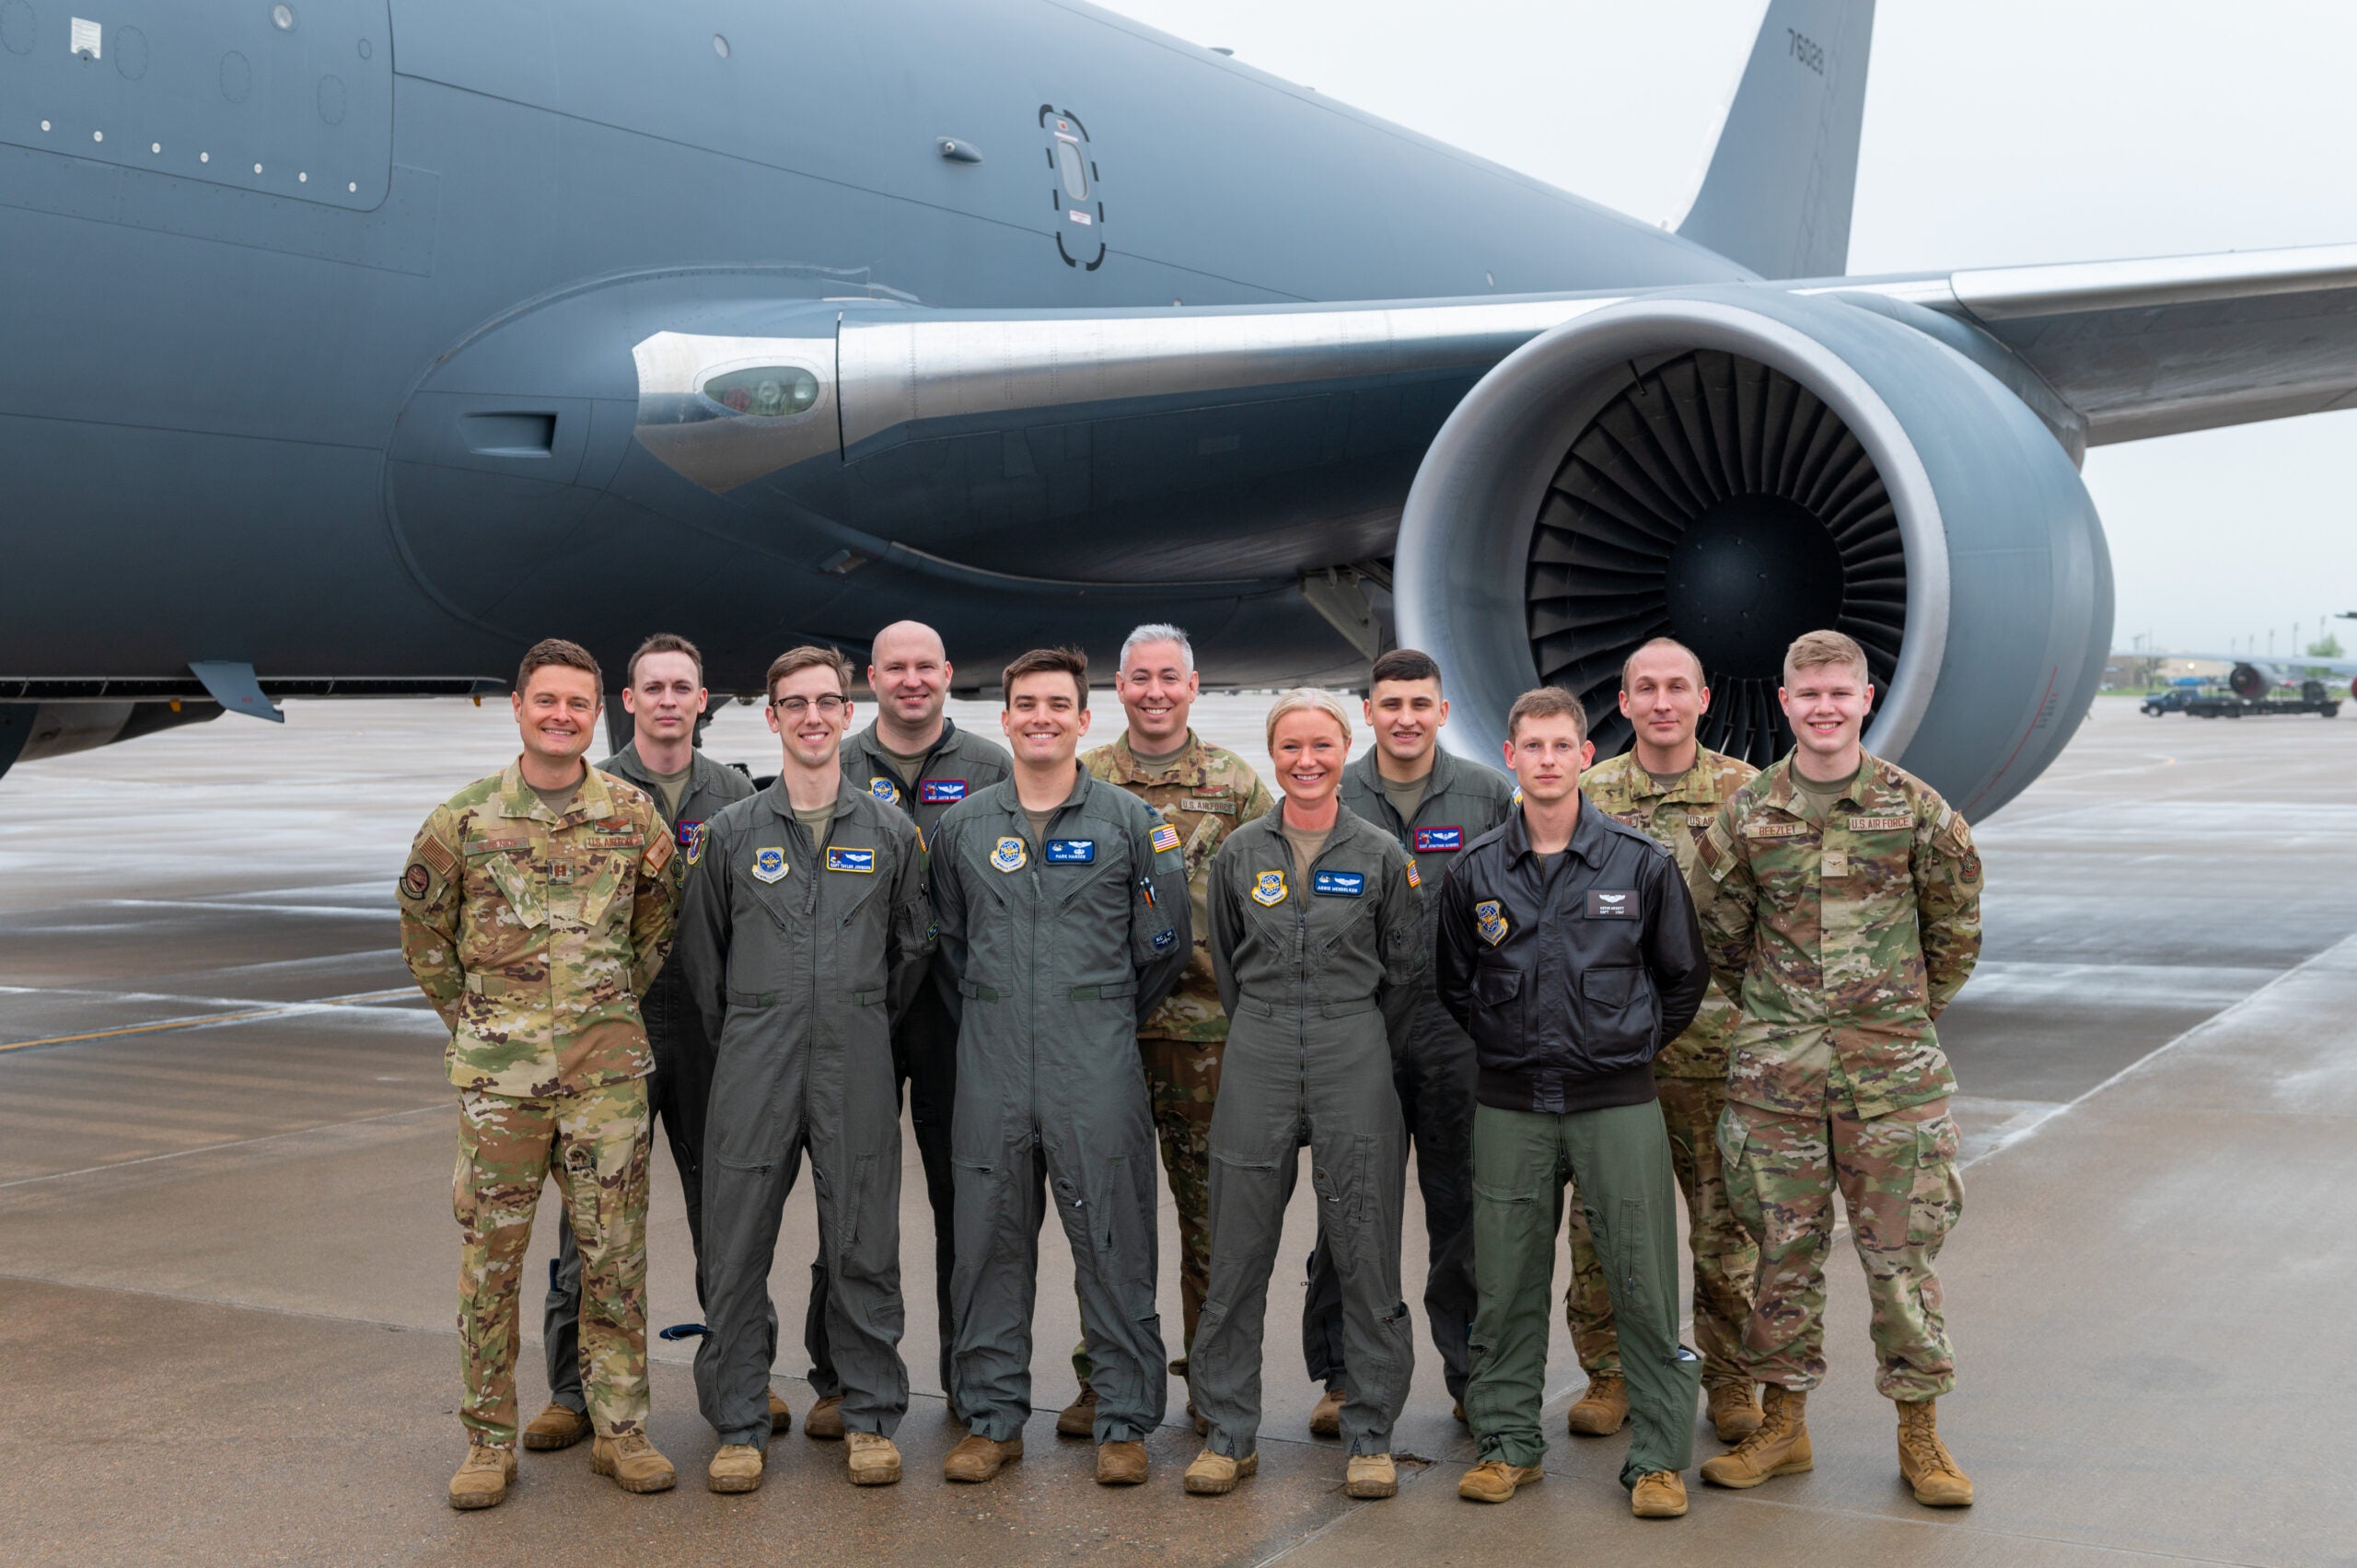 The aircrew from the 22nd Air Refueling Wing’s 24-hour flight pose for a group photo May 5, 2022 at McConnell Air Force Base, Kansas. The aircrew took a group photo before embarking on a 24-hour sortie in a KC-46A Pegasus, completing the Air Mobility Command’s longest flight. (U.S. Air Force photo by Airman Brenden Beezley)